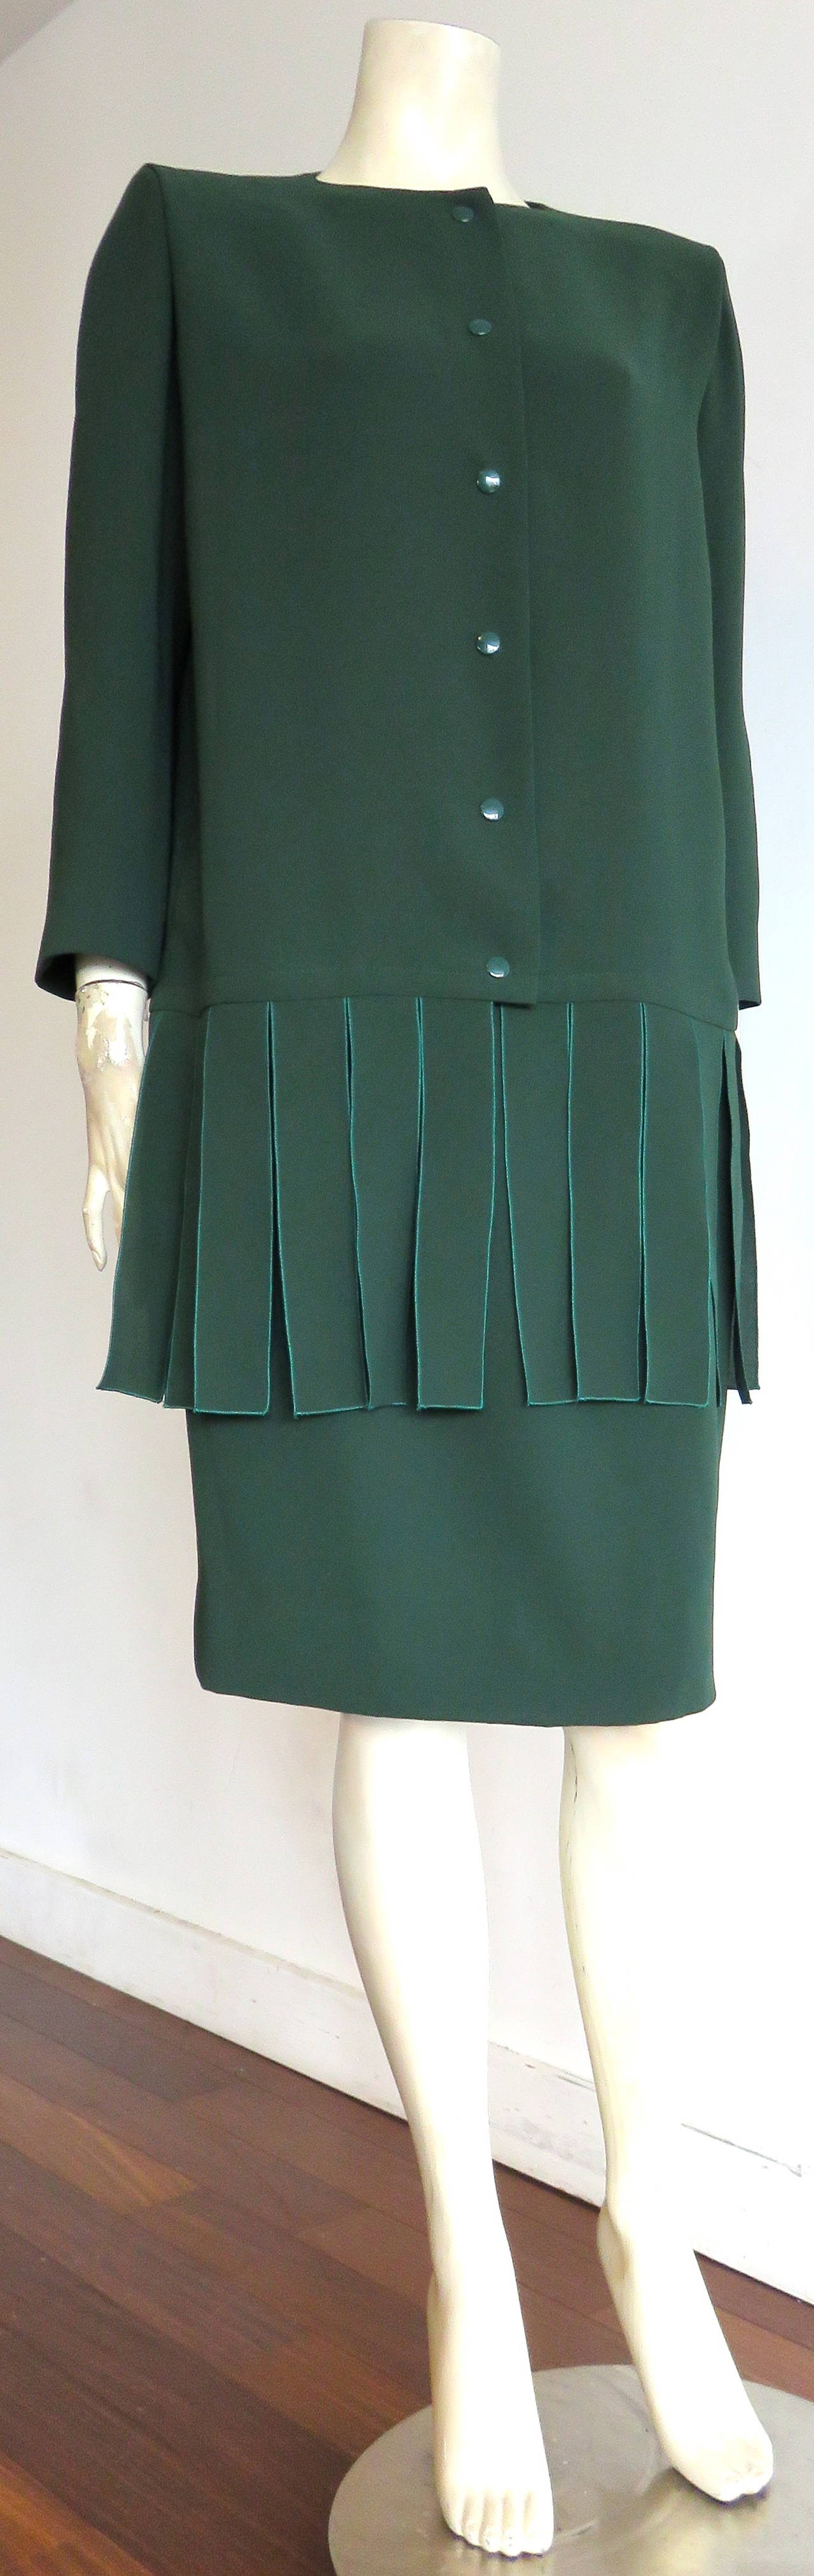 Never worn, 1970's PIERRE CARDIN PARIS Car-wash flap skirt suit.

Iconic, Pierre Cardin, flap-detail, skirt suit in forest green, silk-crepe fabrication.

Boxy-sihouette jacket with metal snap front closures, and flap-detail hem.

The matching